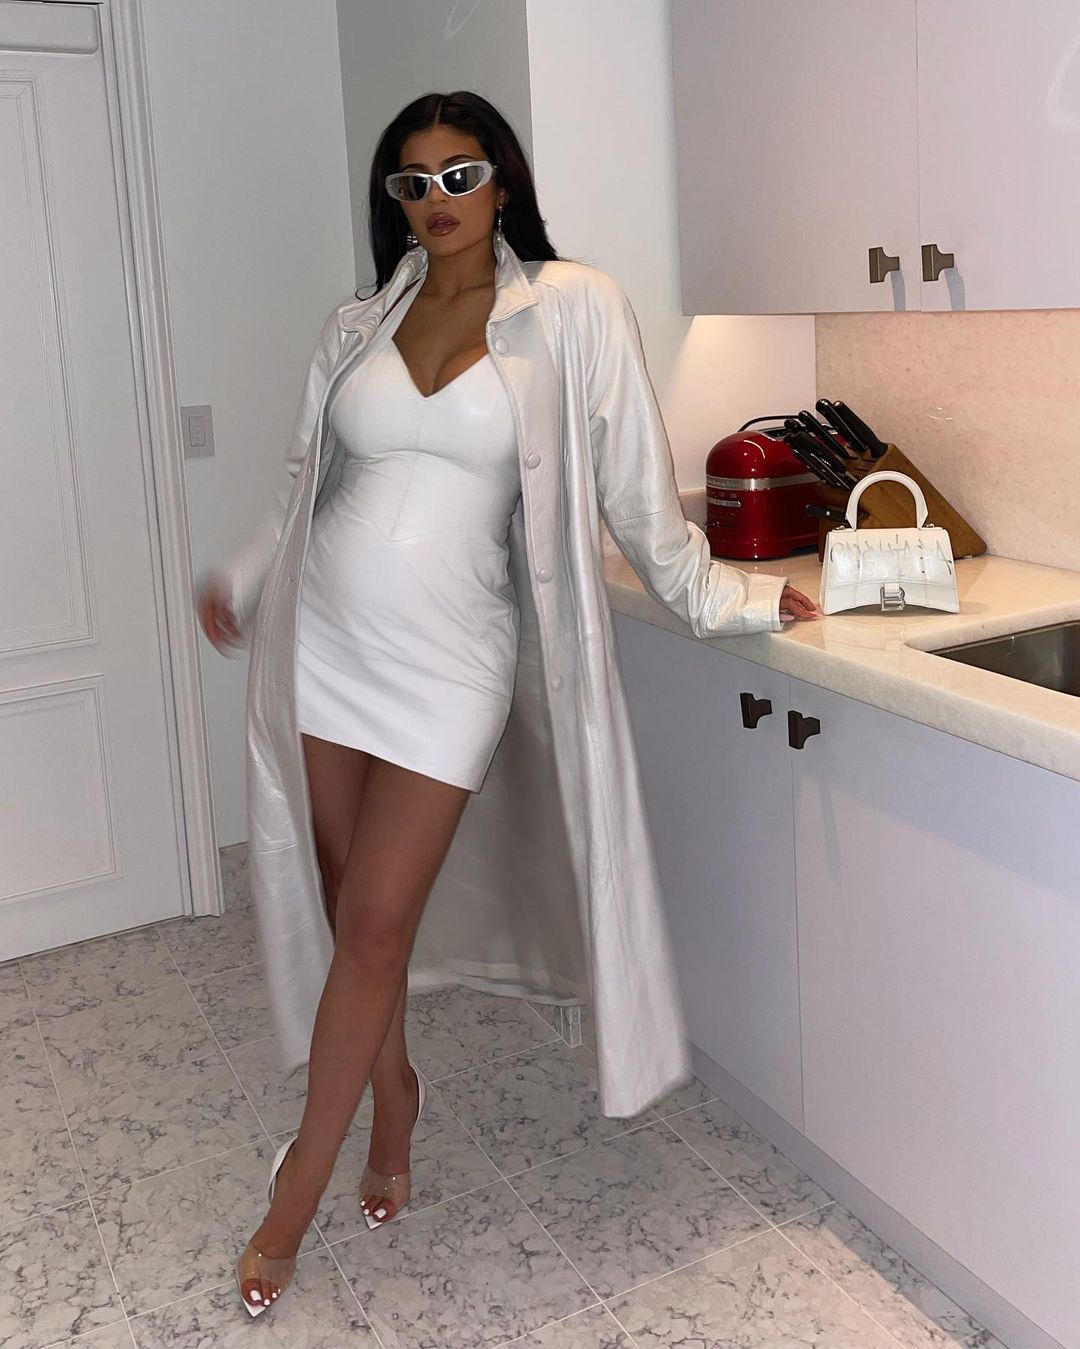 Kylie Jenner Shares Thirst Trap While Cheating Rumors Swirl! - Photo 49